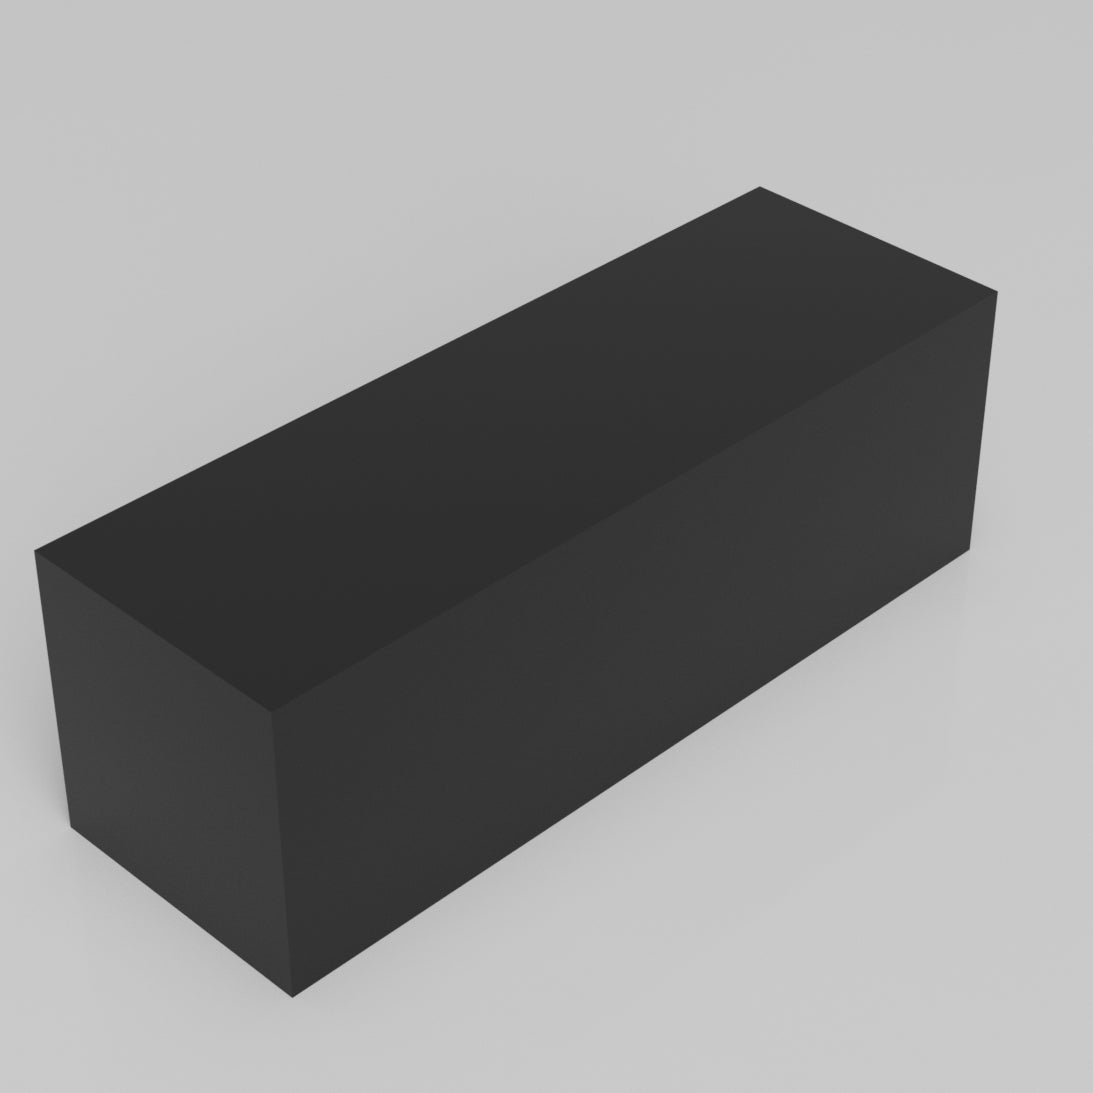 Machinable Wax Rectangular Block Front View 2 Inch by 2 Inch by 6 Inch